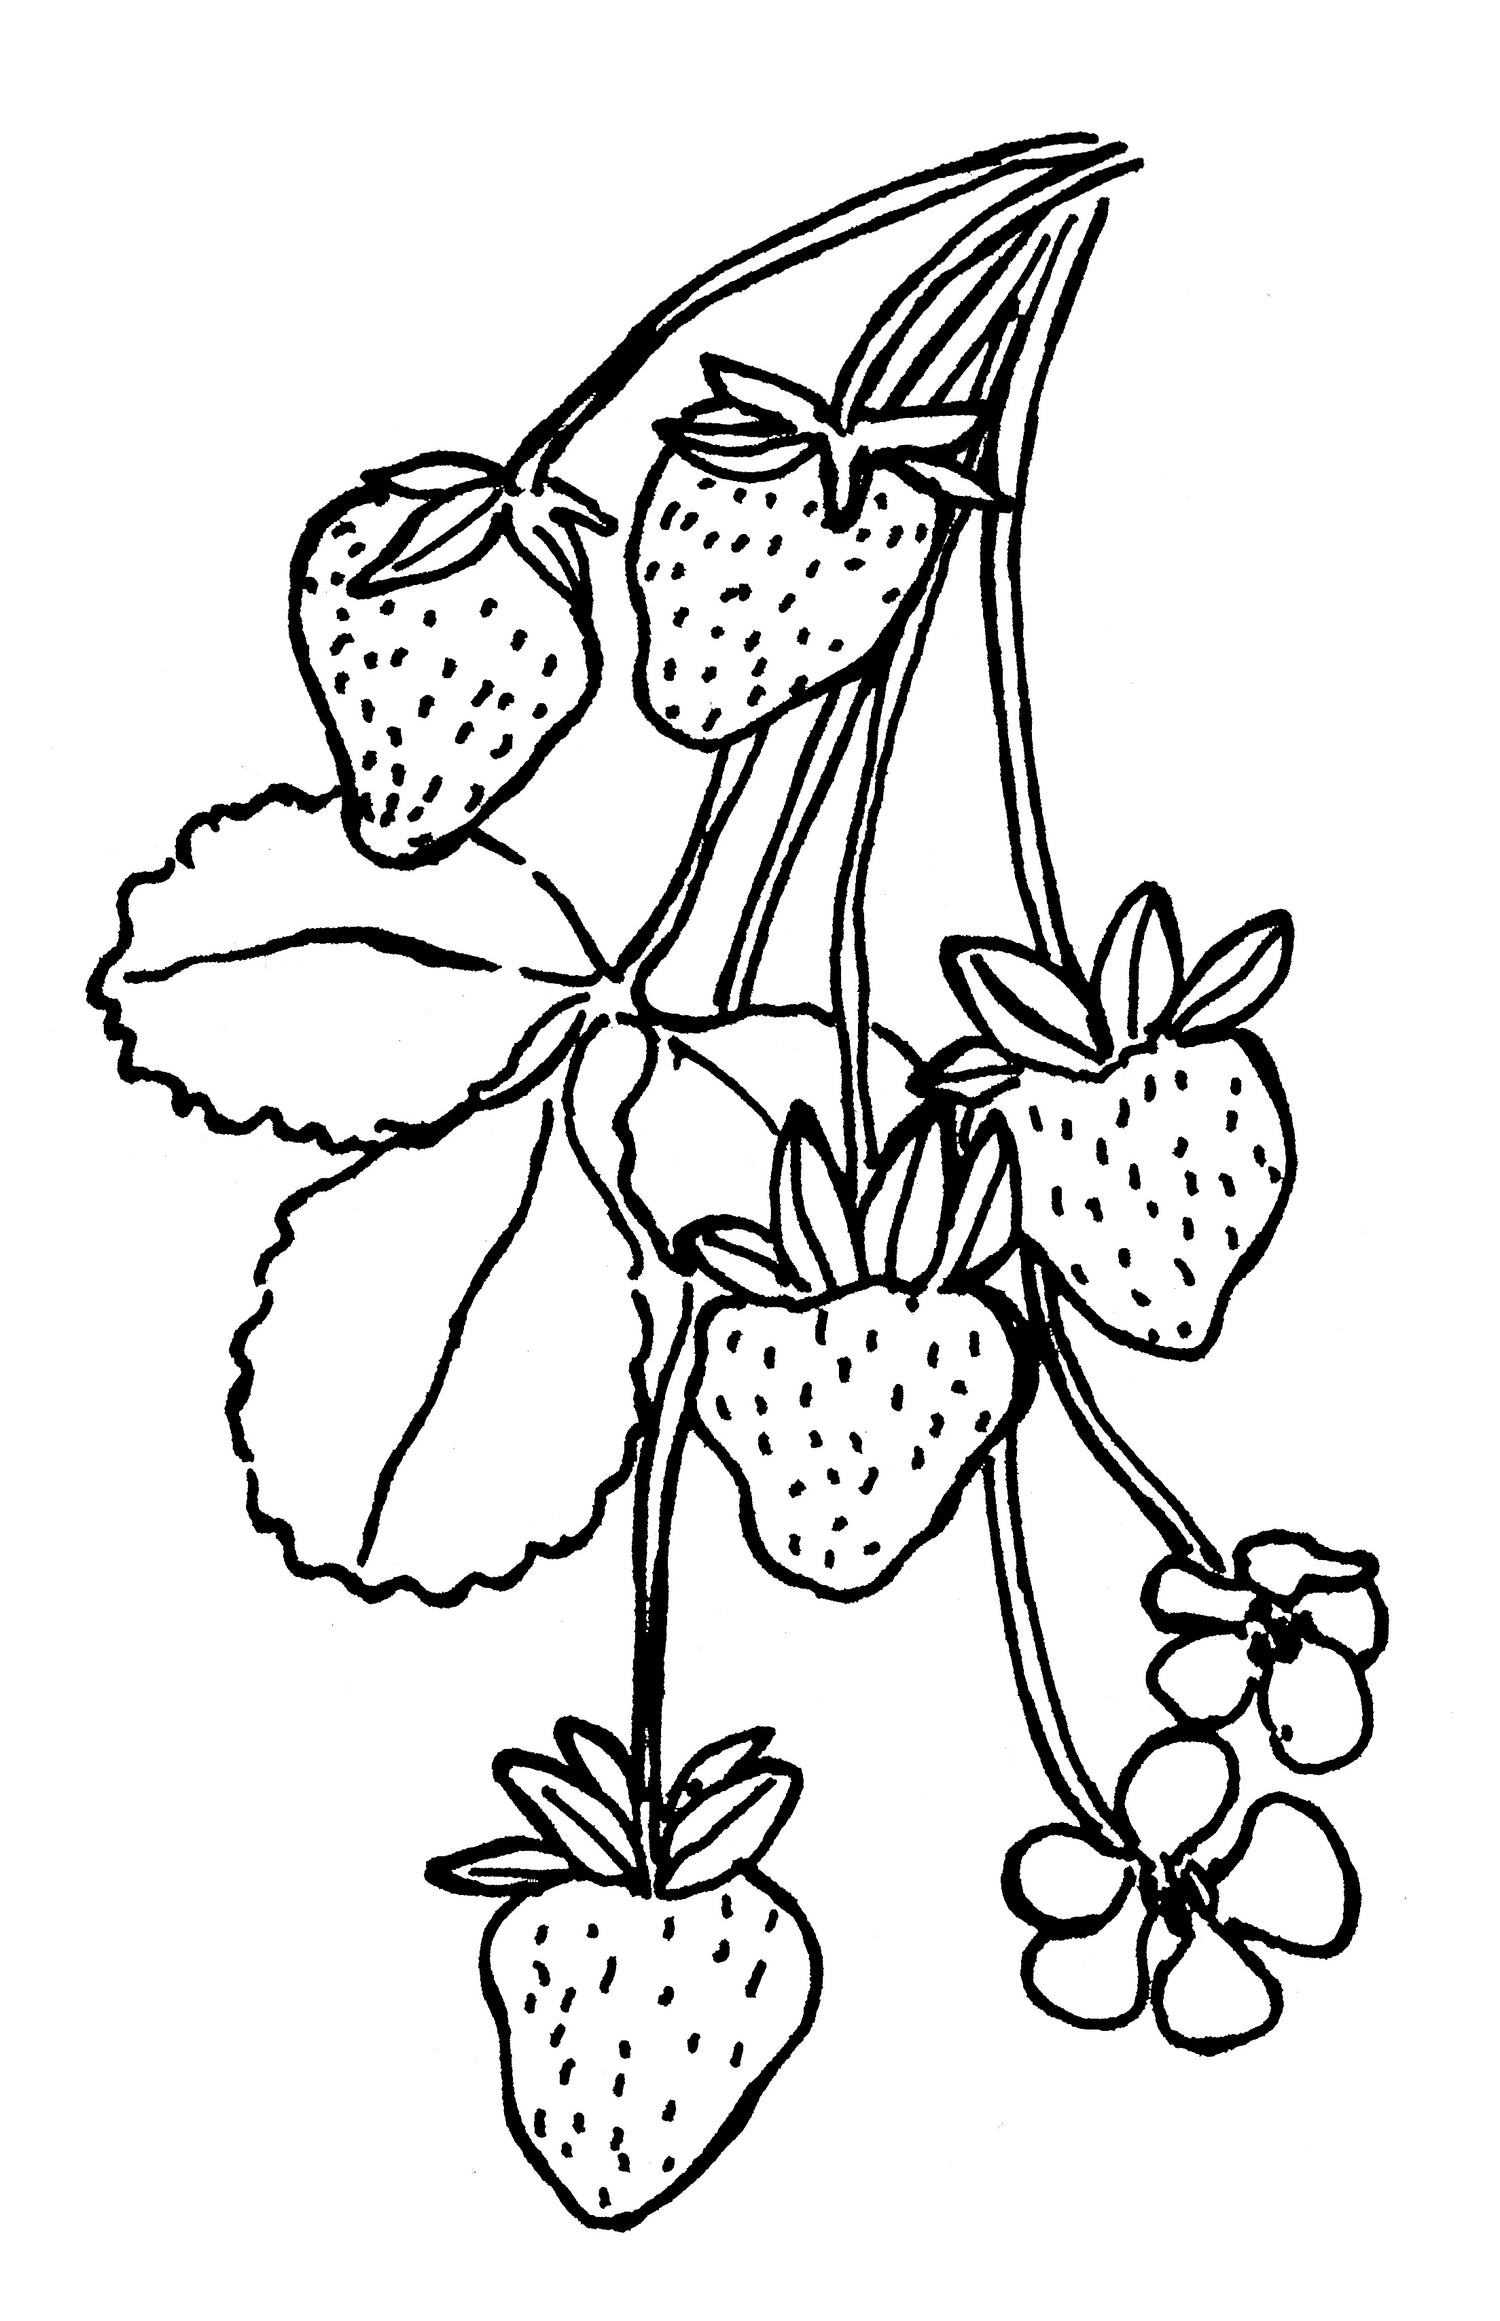 black and white illustration of a cluster of strawberries hanging from stems with leaves and 2 flowers